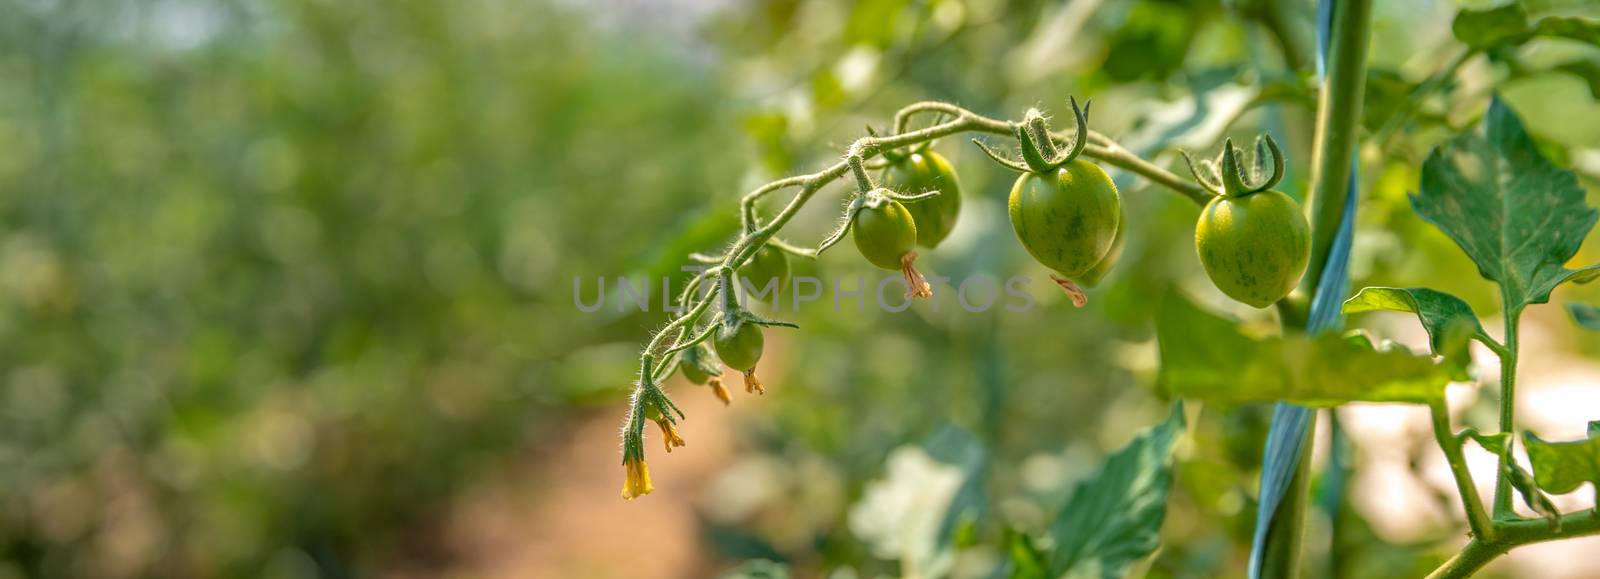 ripening green tomatoes in a greenhouse on an organic farm. healthy vegetables full of vitamins by Edophoto